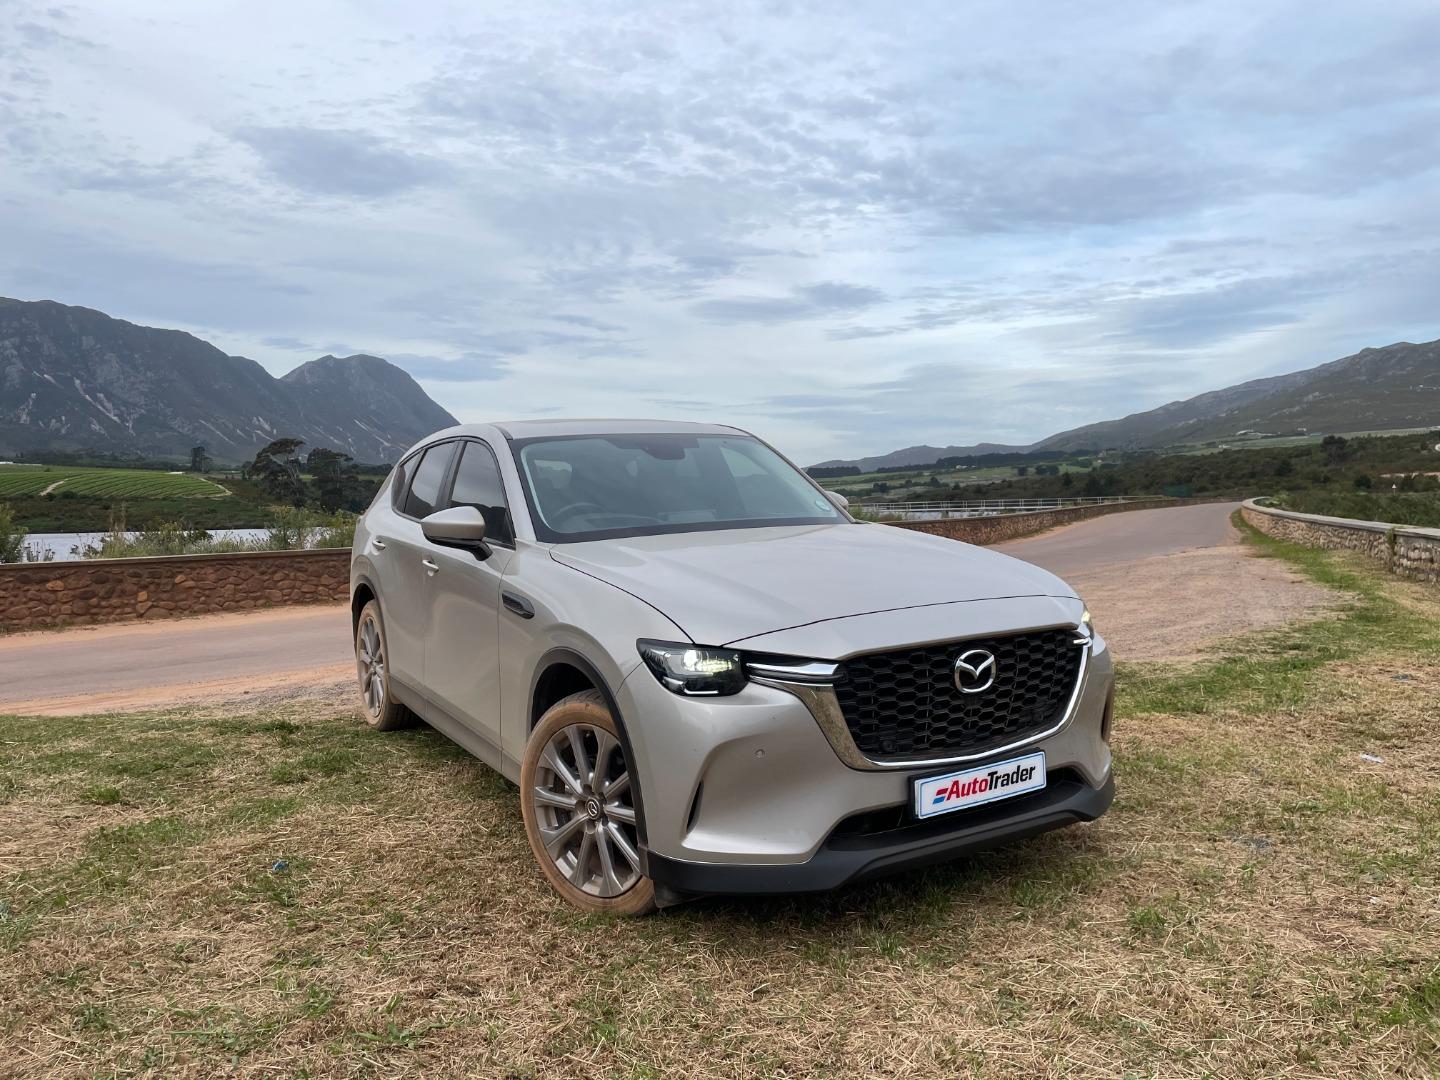 is the mazda cx-60 good for families?